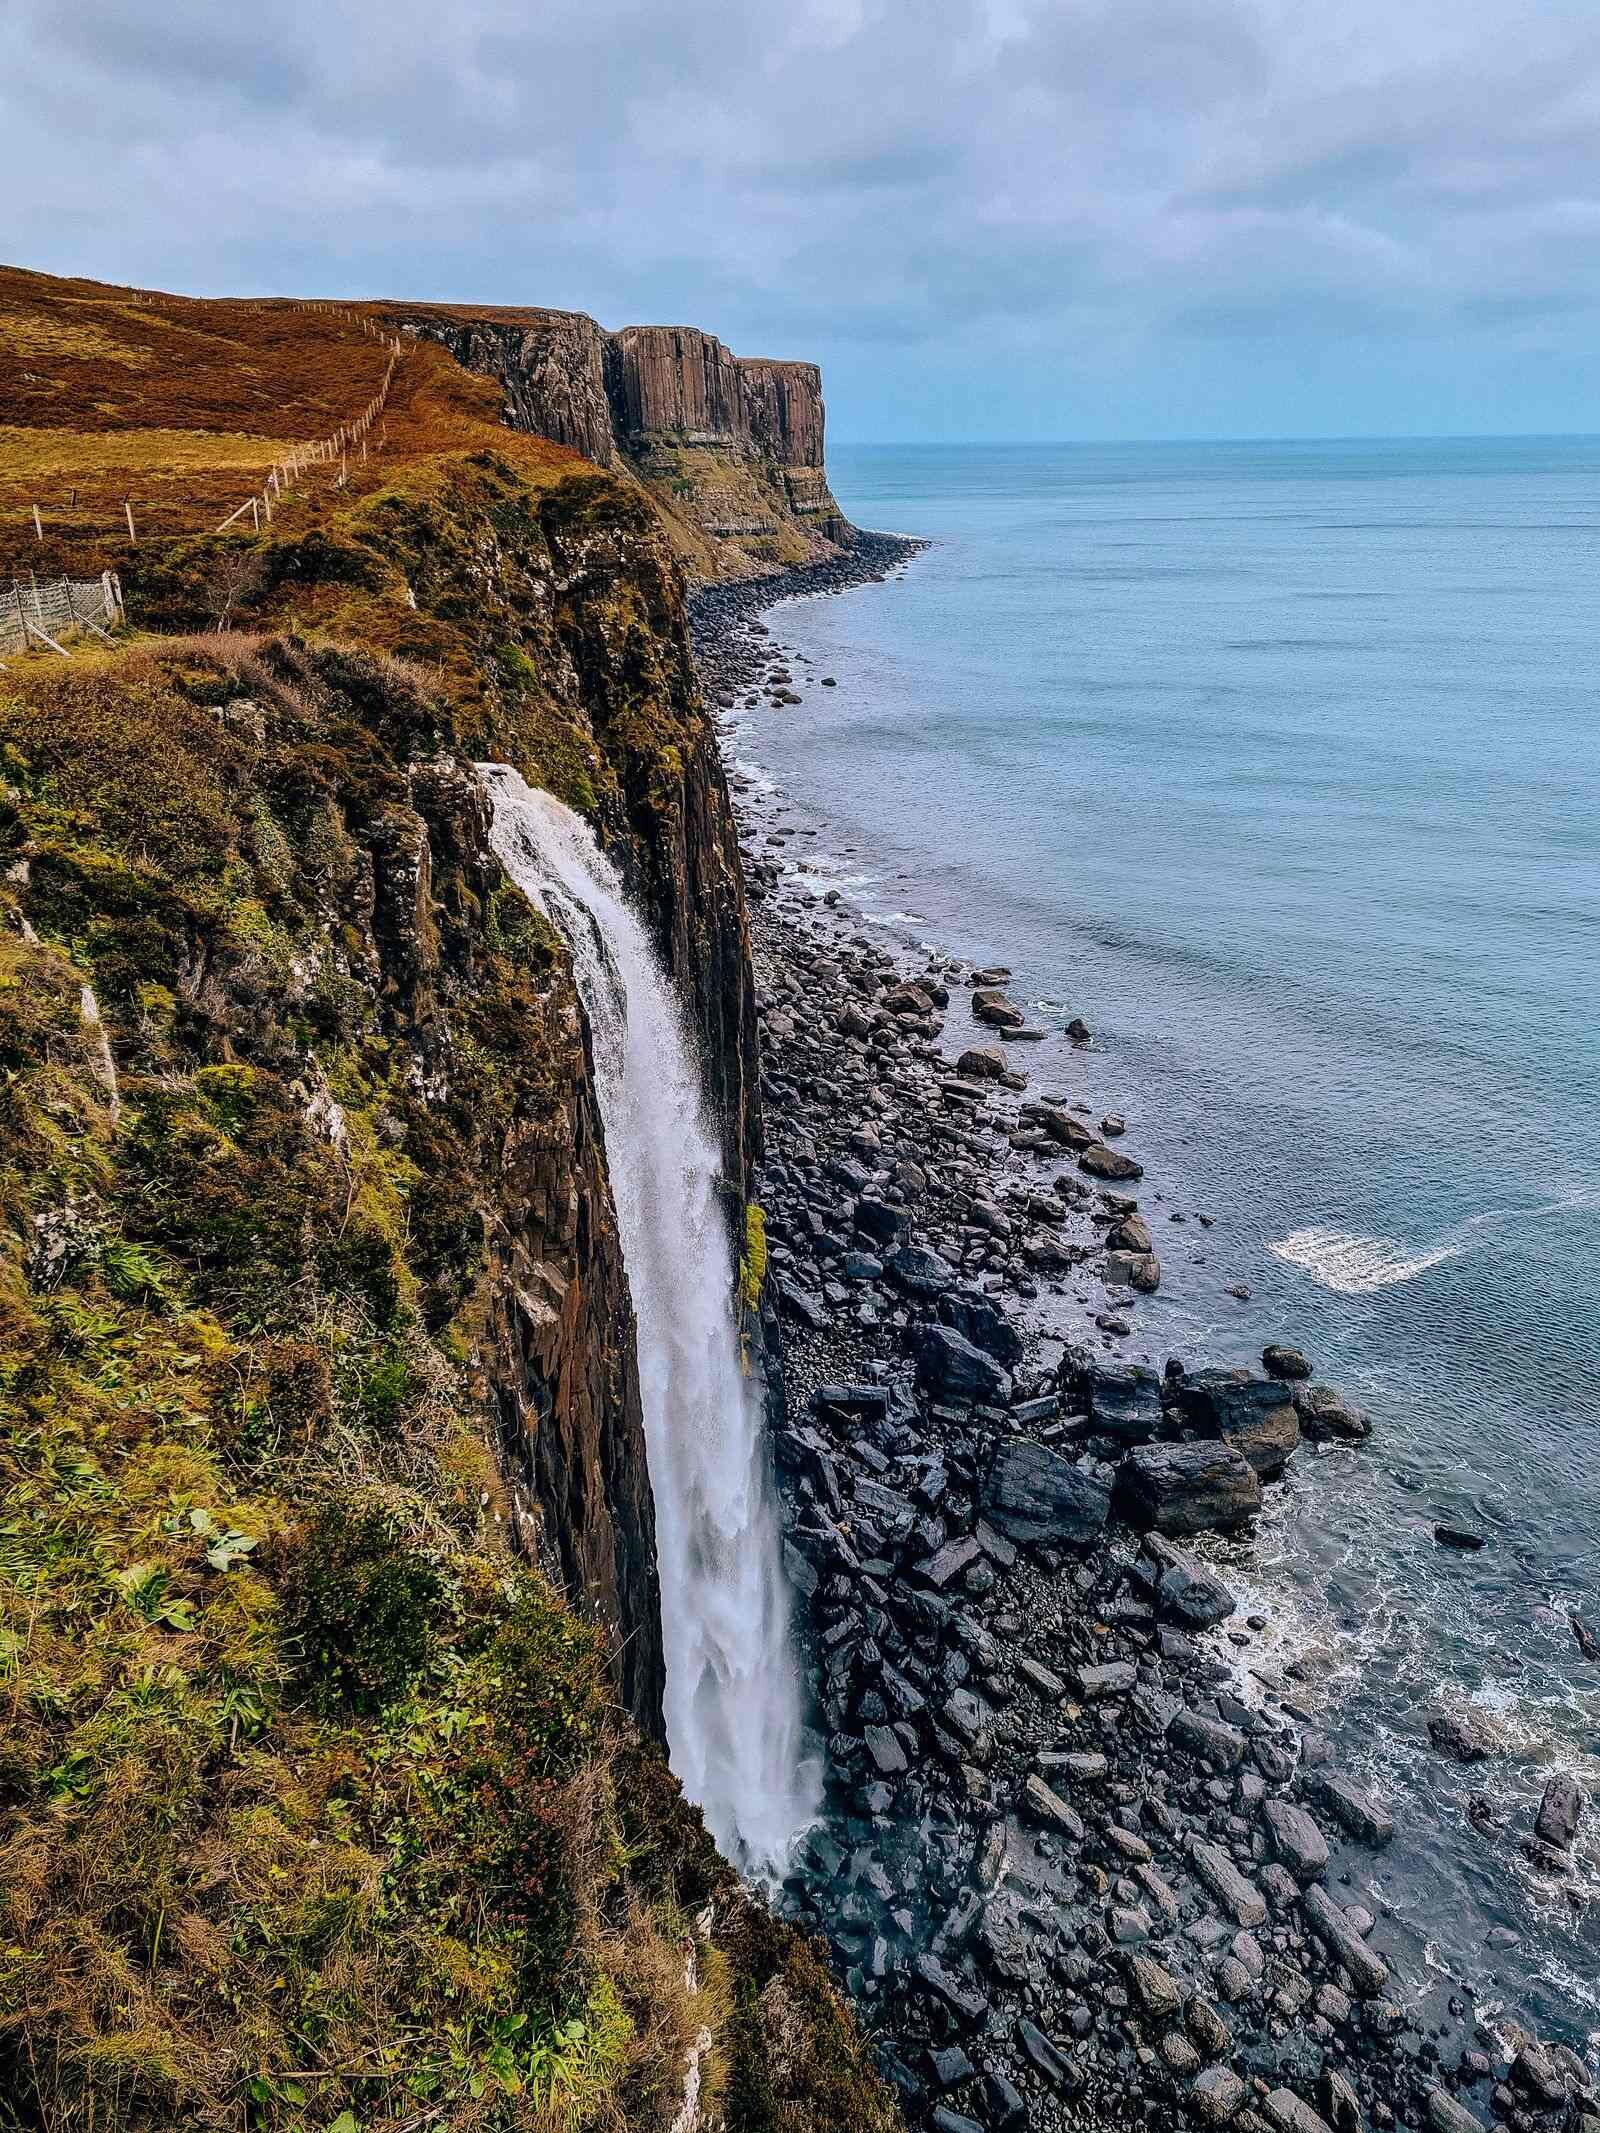 A waterfall falling from a grassy cliff into the sea